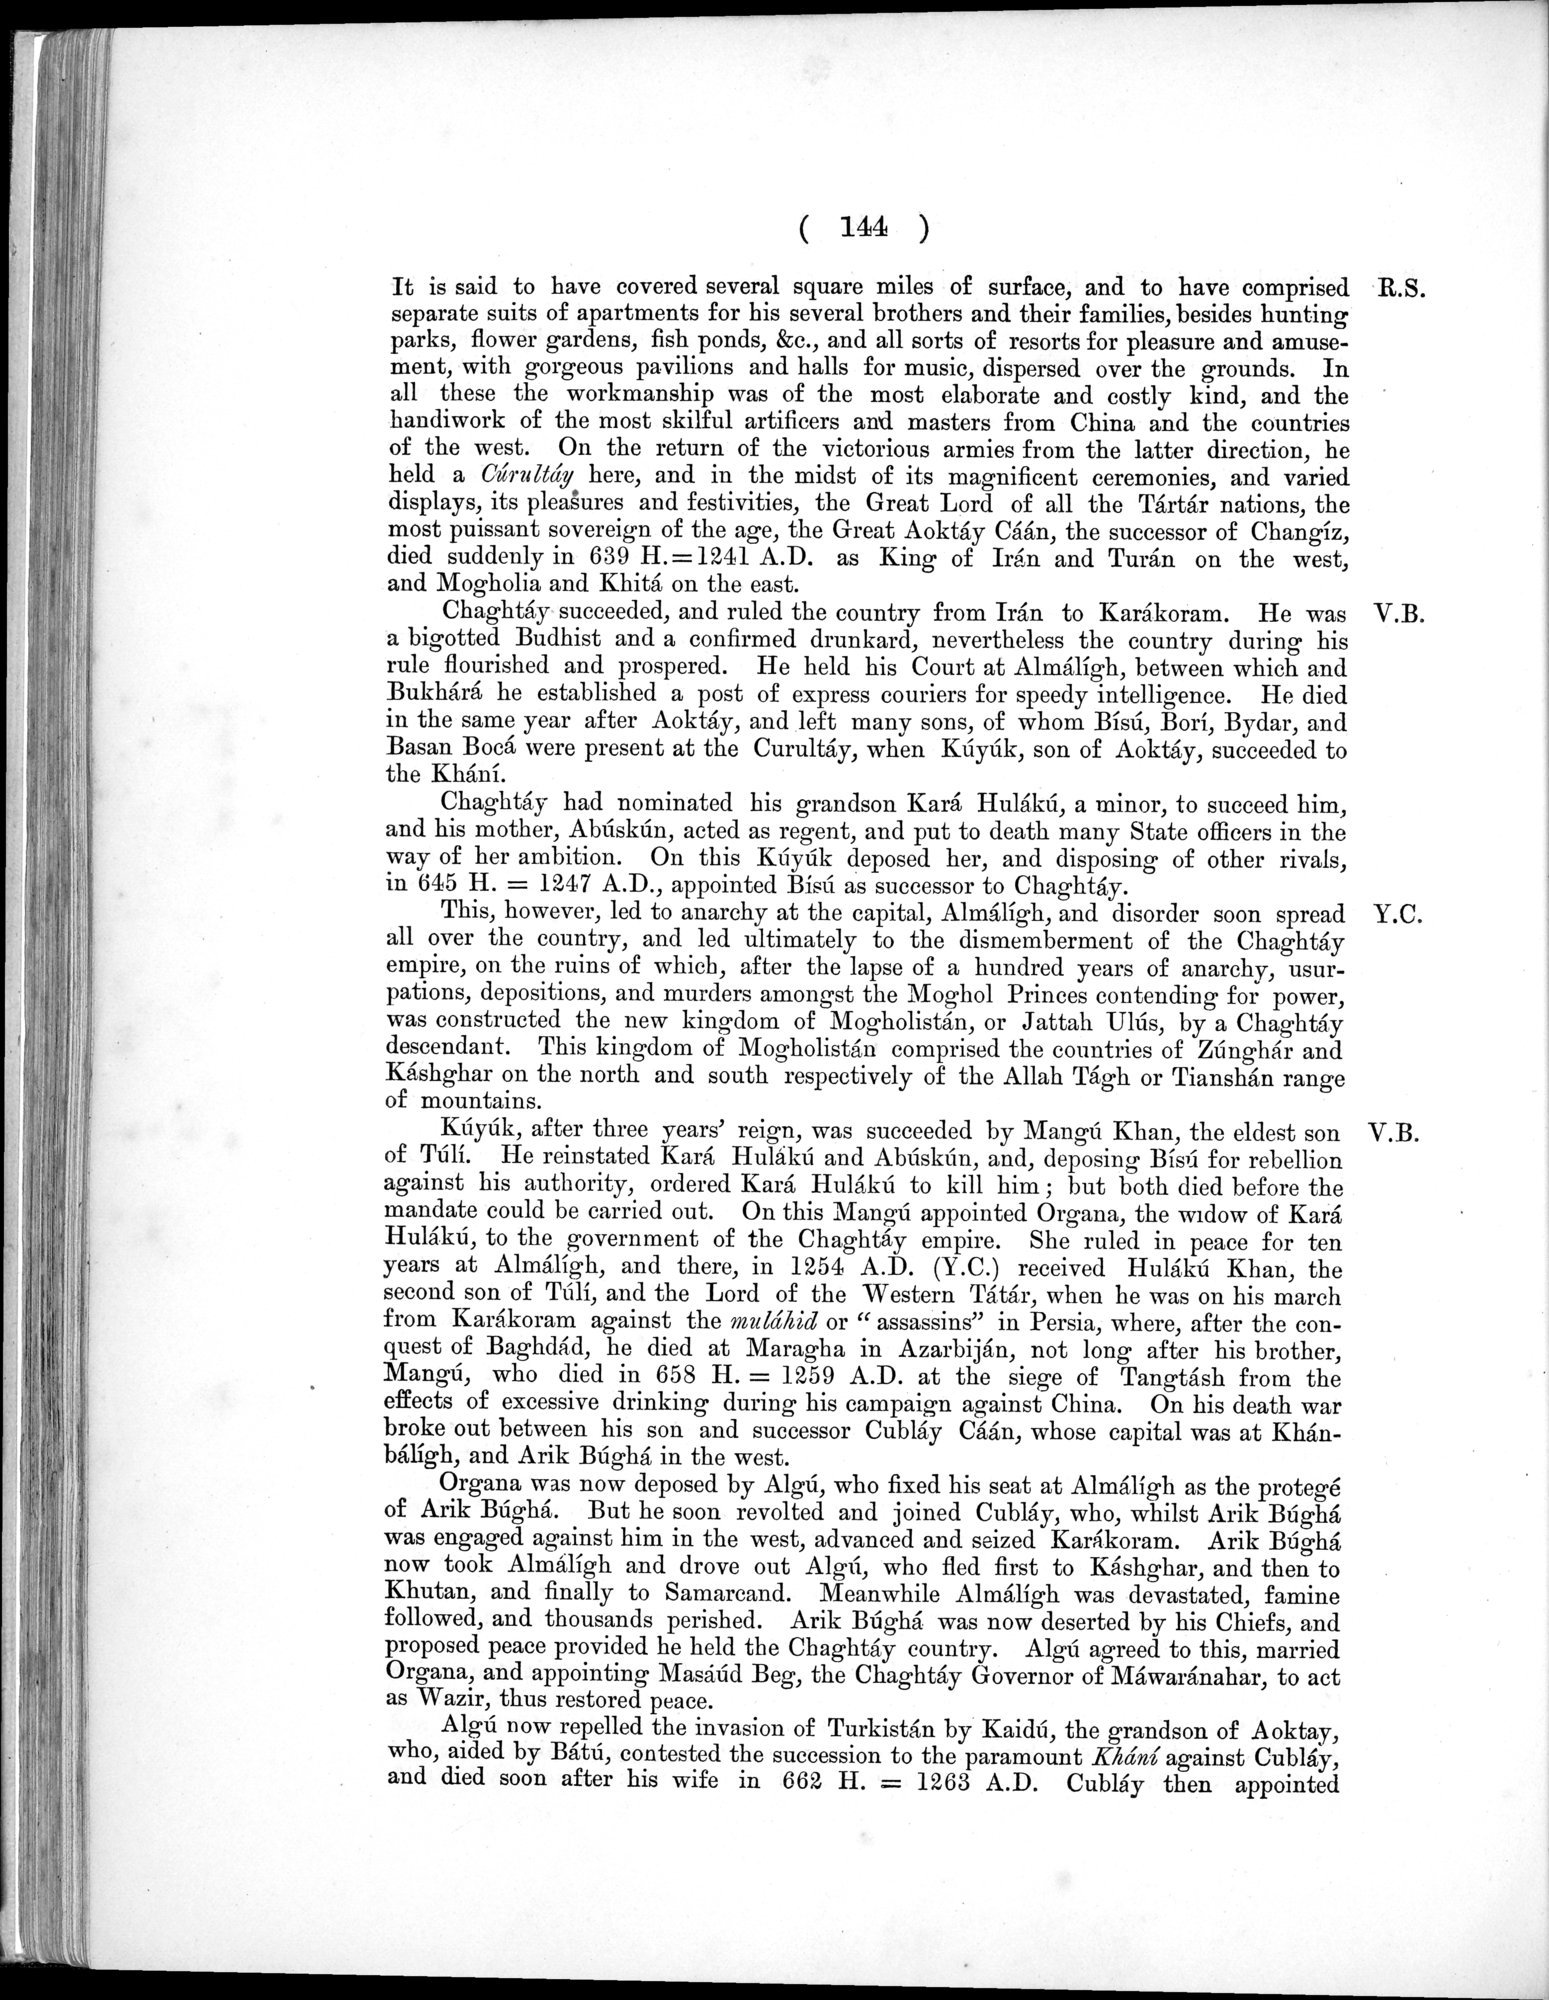 Report of a Mission to Yarkund in 1873 : vol.1 / Page 214 (Grayscale High Resolution Image)